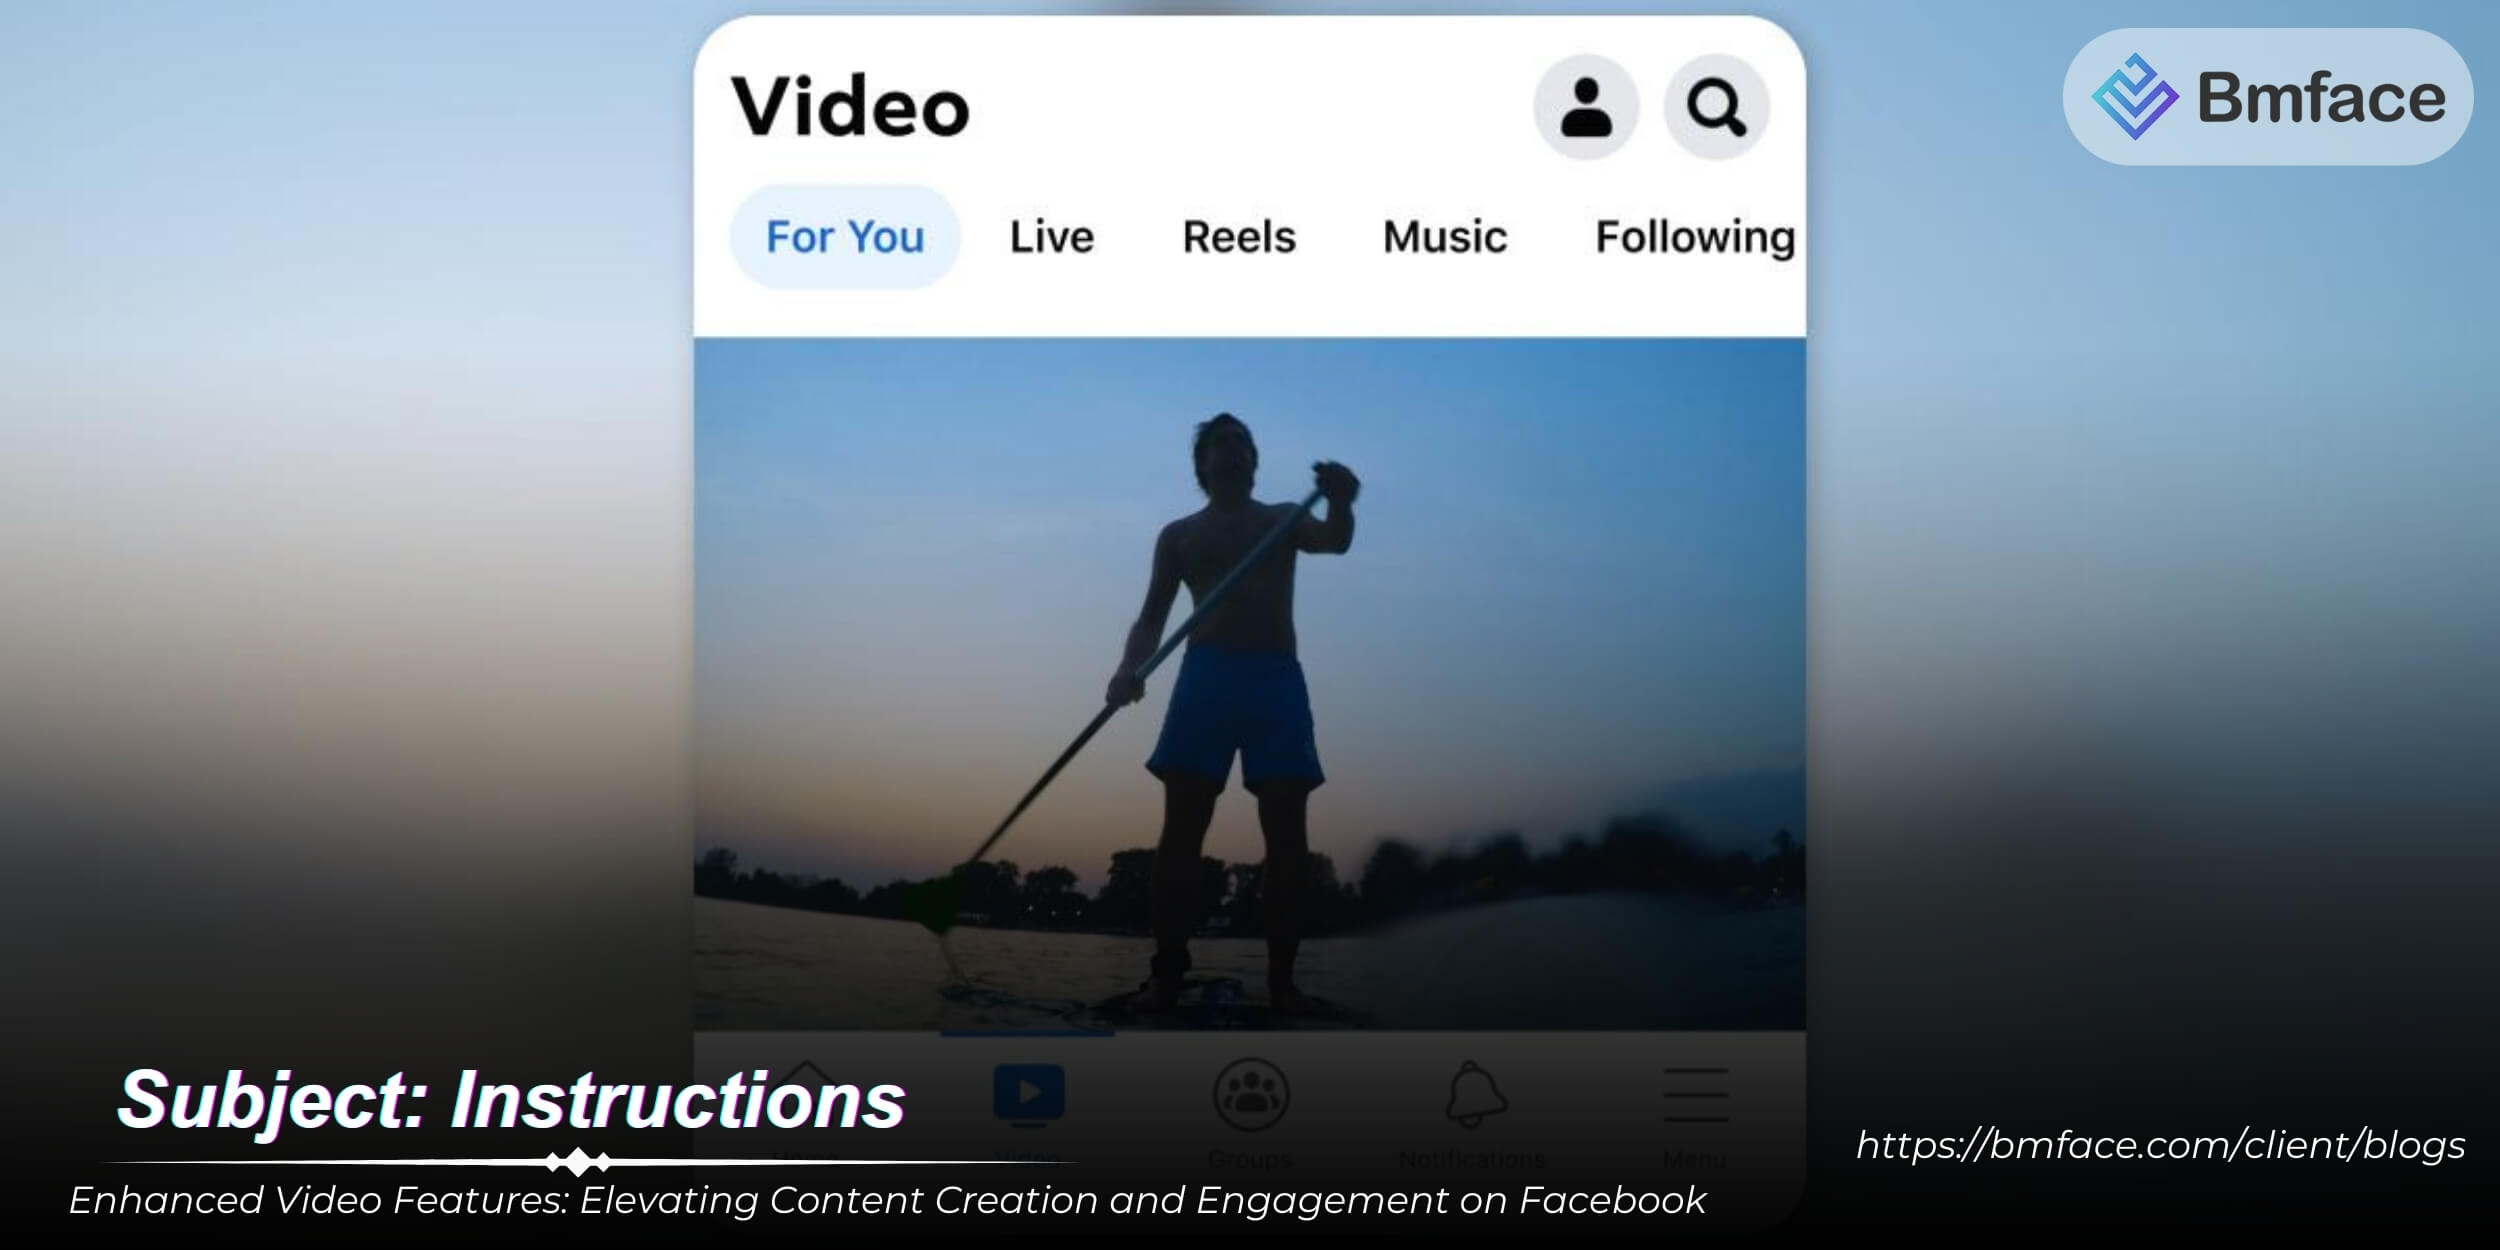 Enhanced Video Features: Elevating Content Creation and Engagement on Facebook